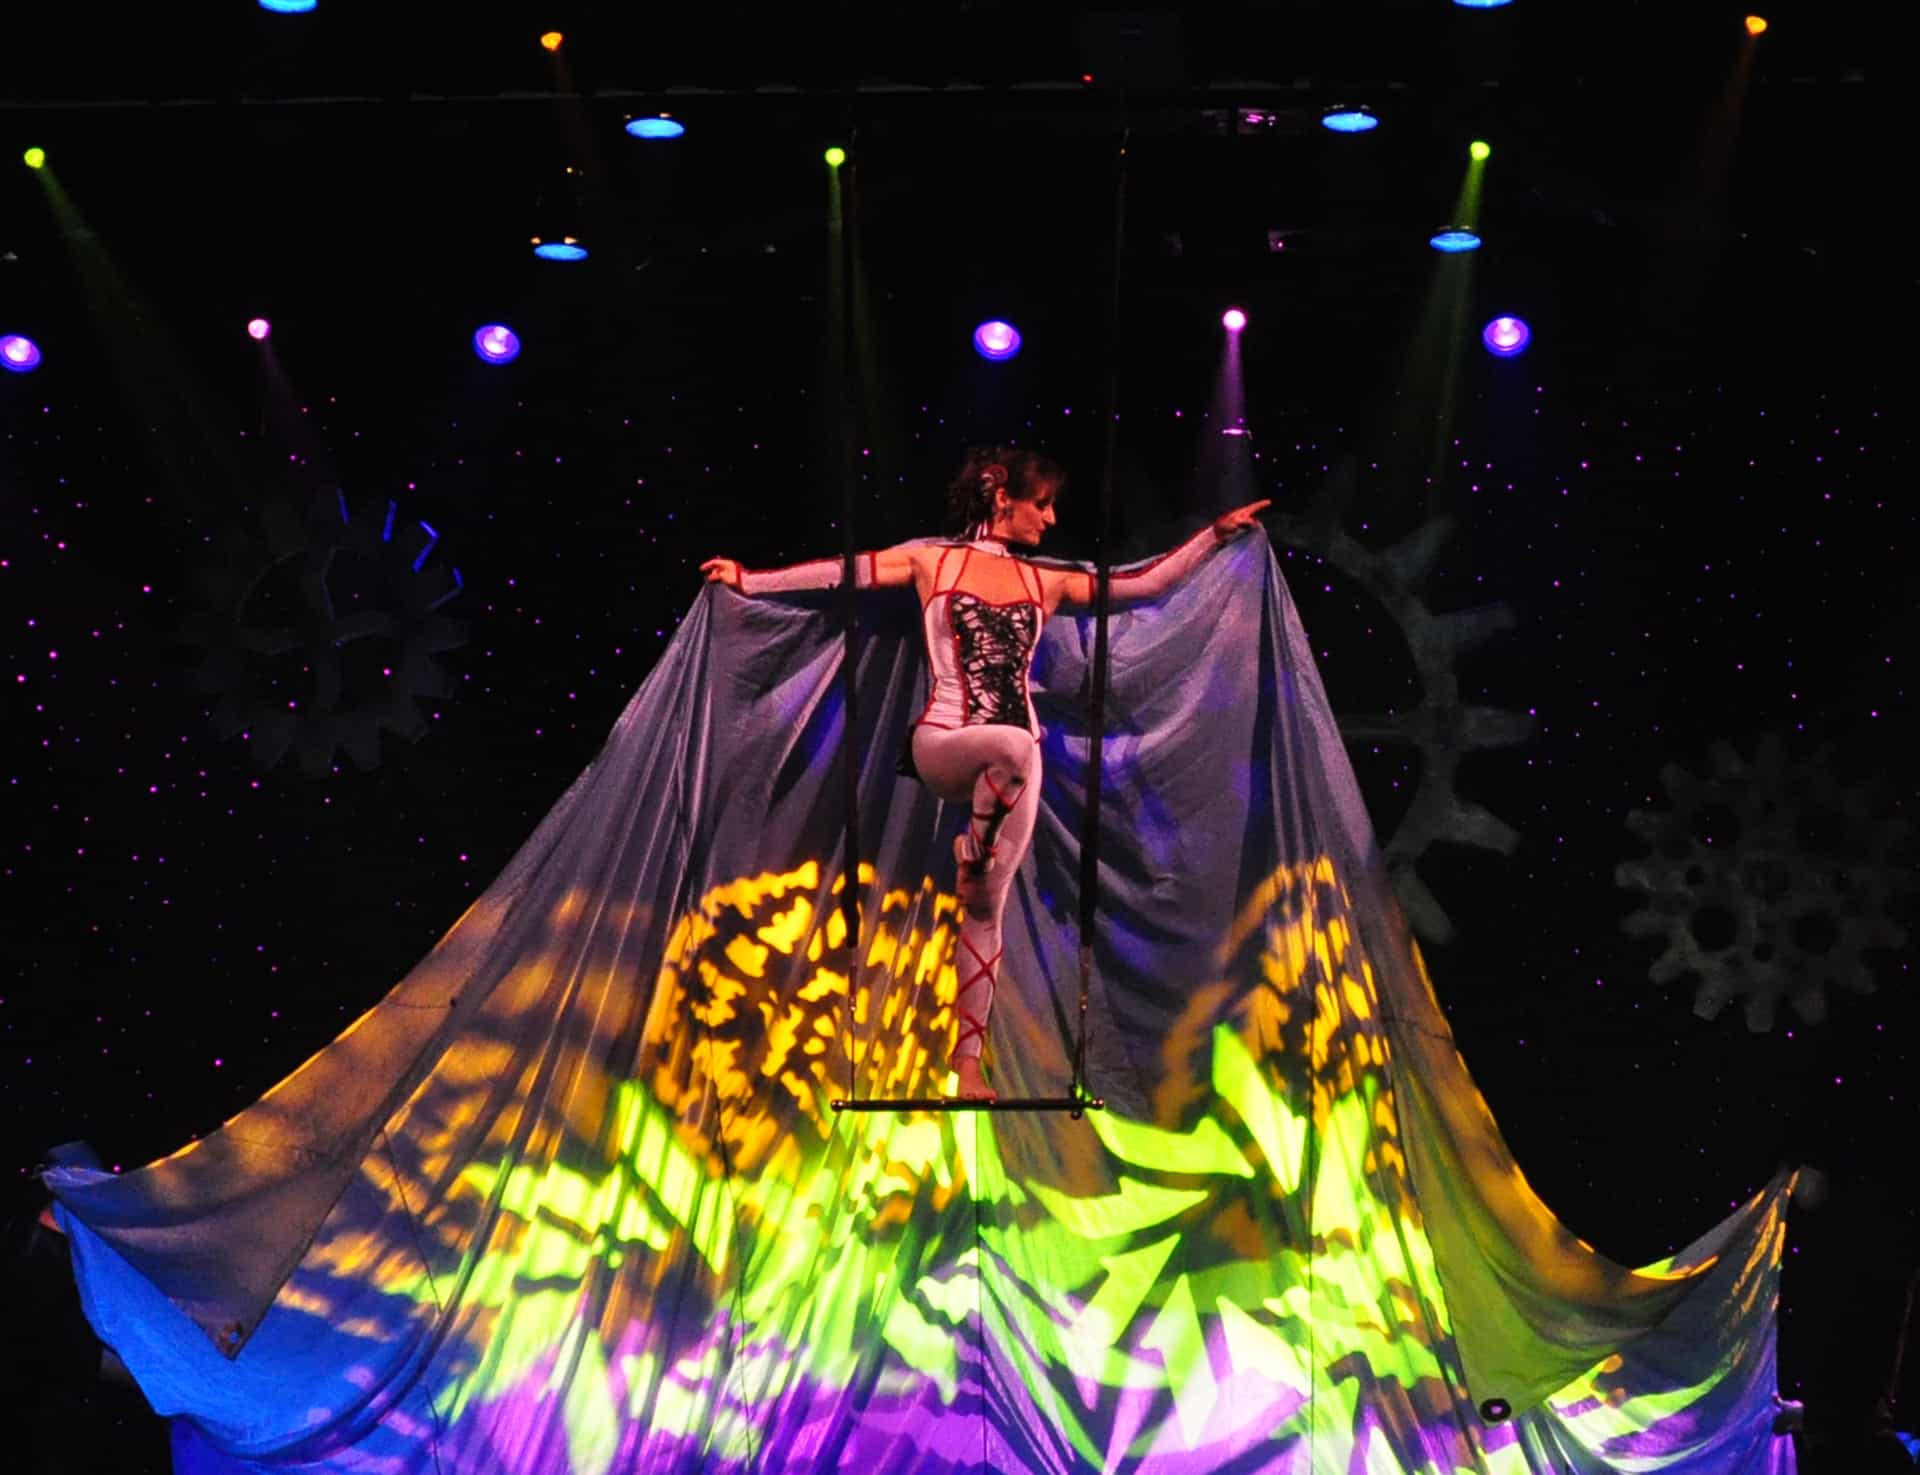 :  Thin woman standing on a trapeze bar spreading a large colorful cape flowing  behind her